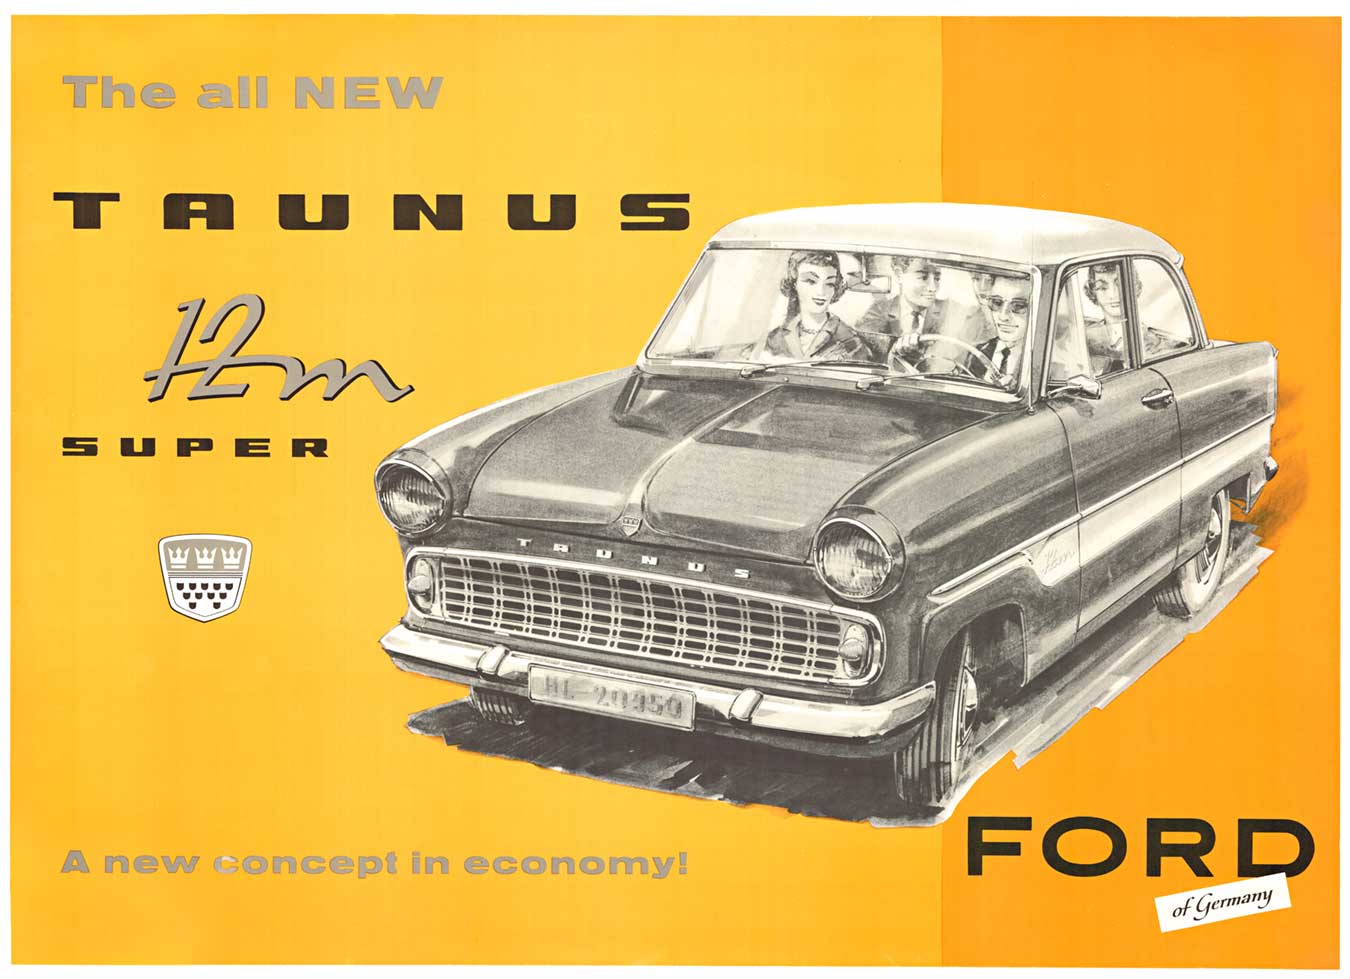 The Taunus 12M presented in 1952 was the first new German Ford after World War II. It featured ponton styling, similar in style to British Ford Zephyr. This poster features the later model from 1959. Archival linen backed in Excellent condition (A), re